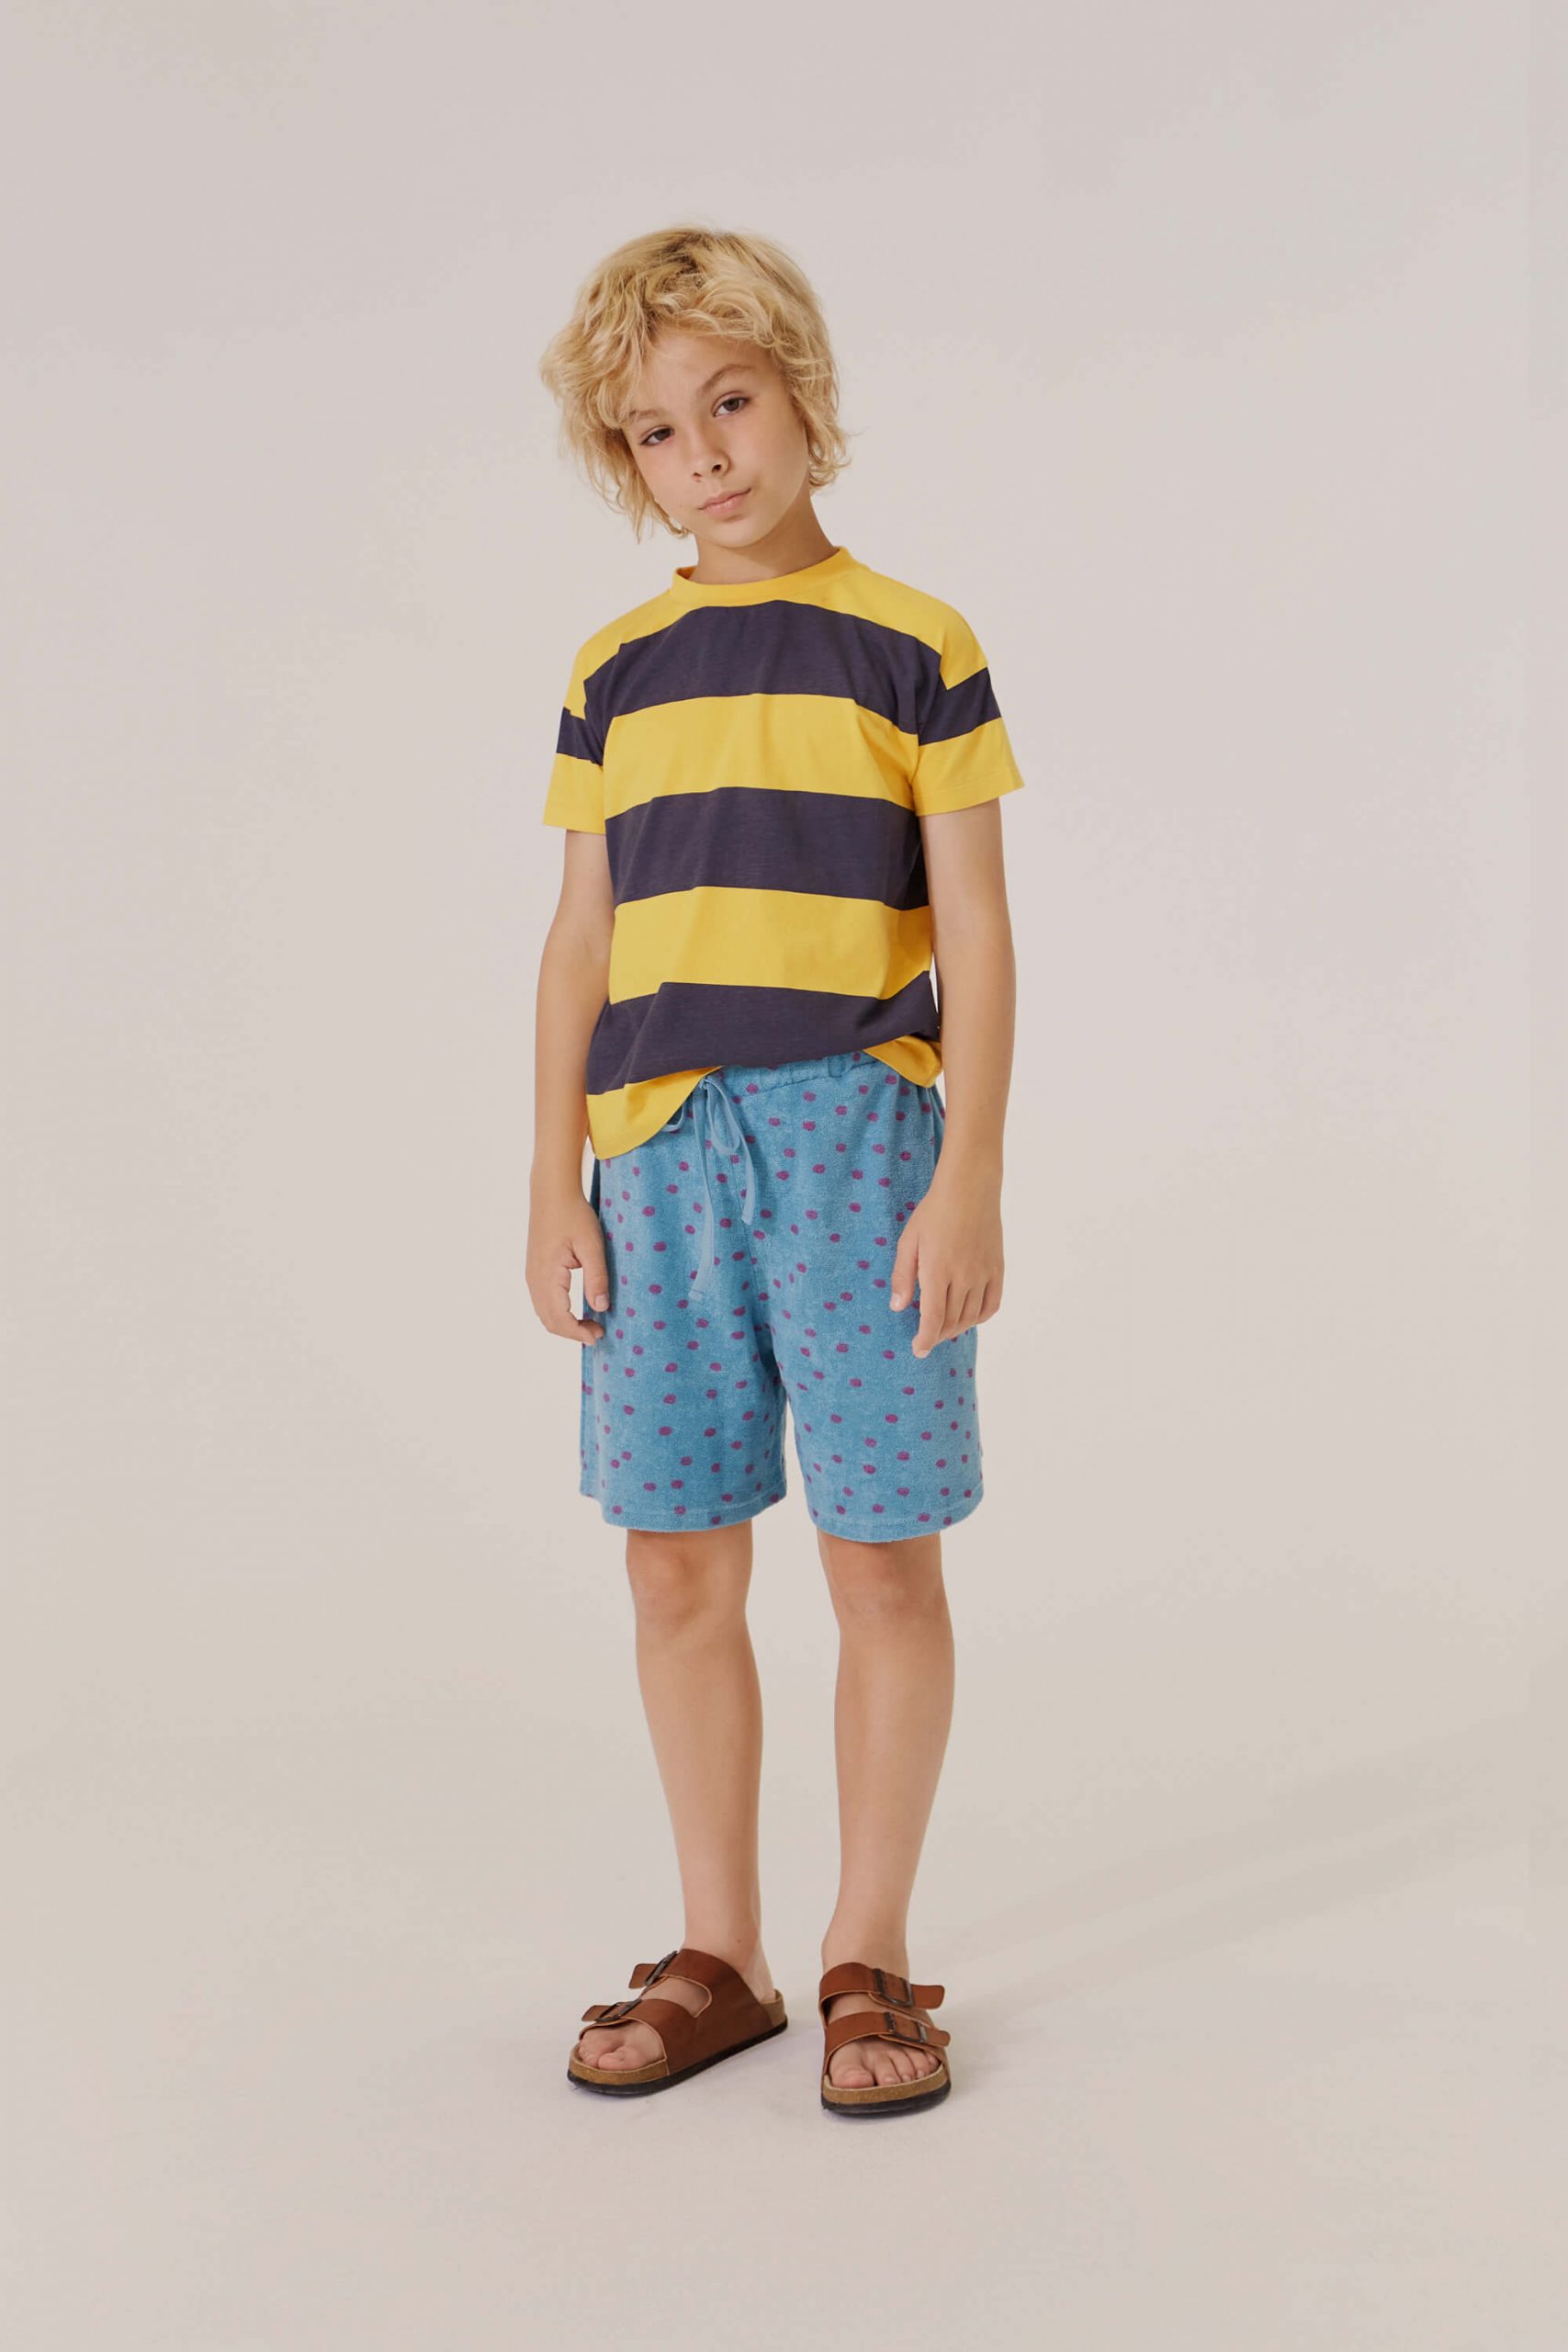 Buy cotton trousers for boys and girls - The Campamento